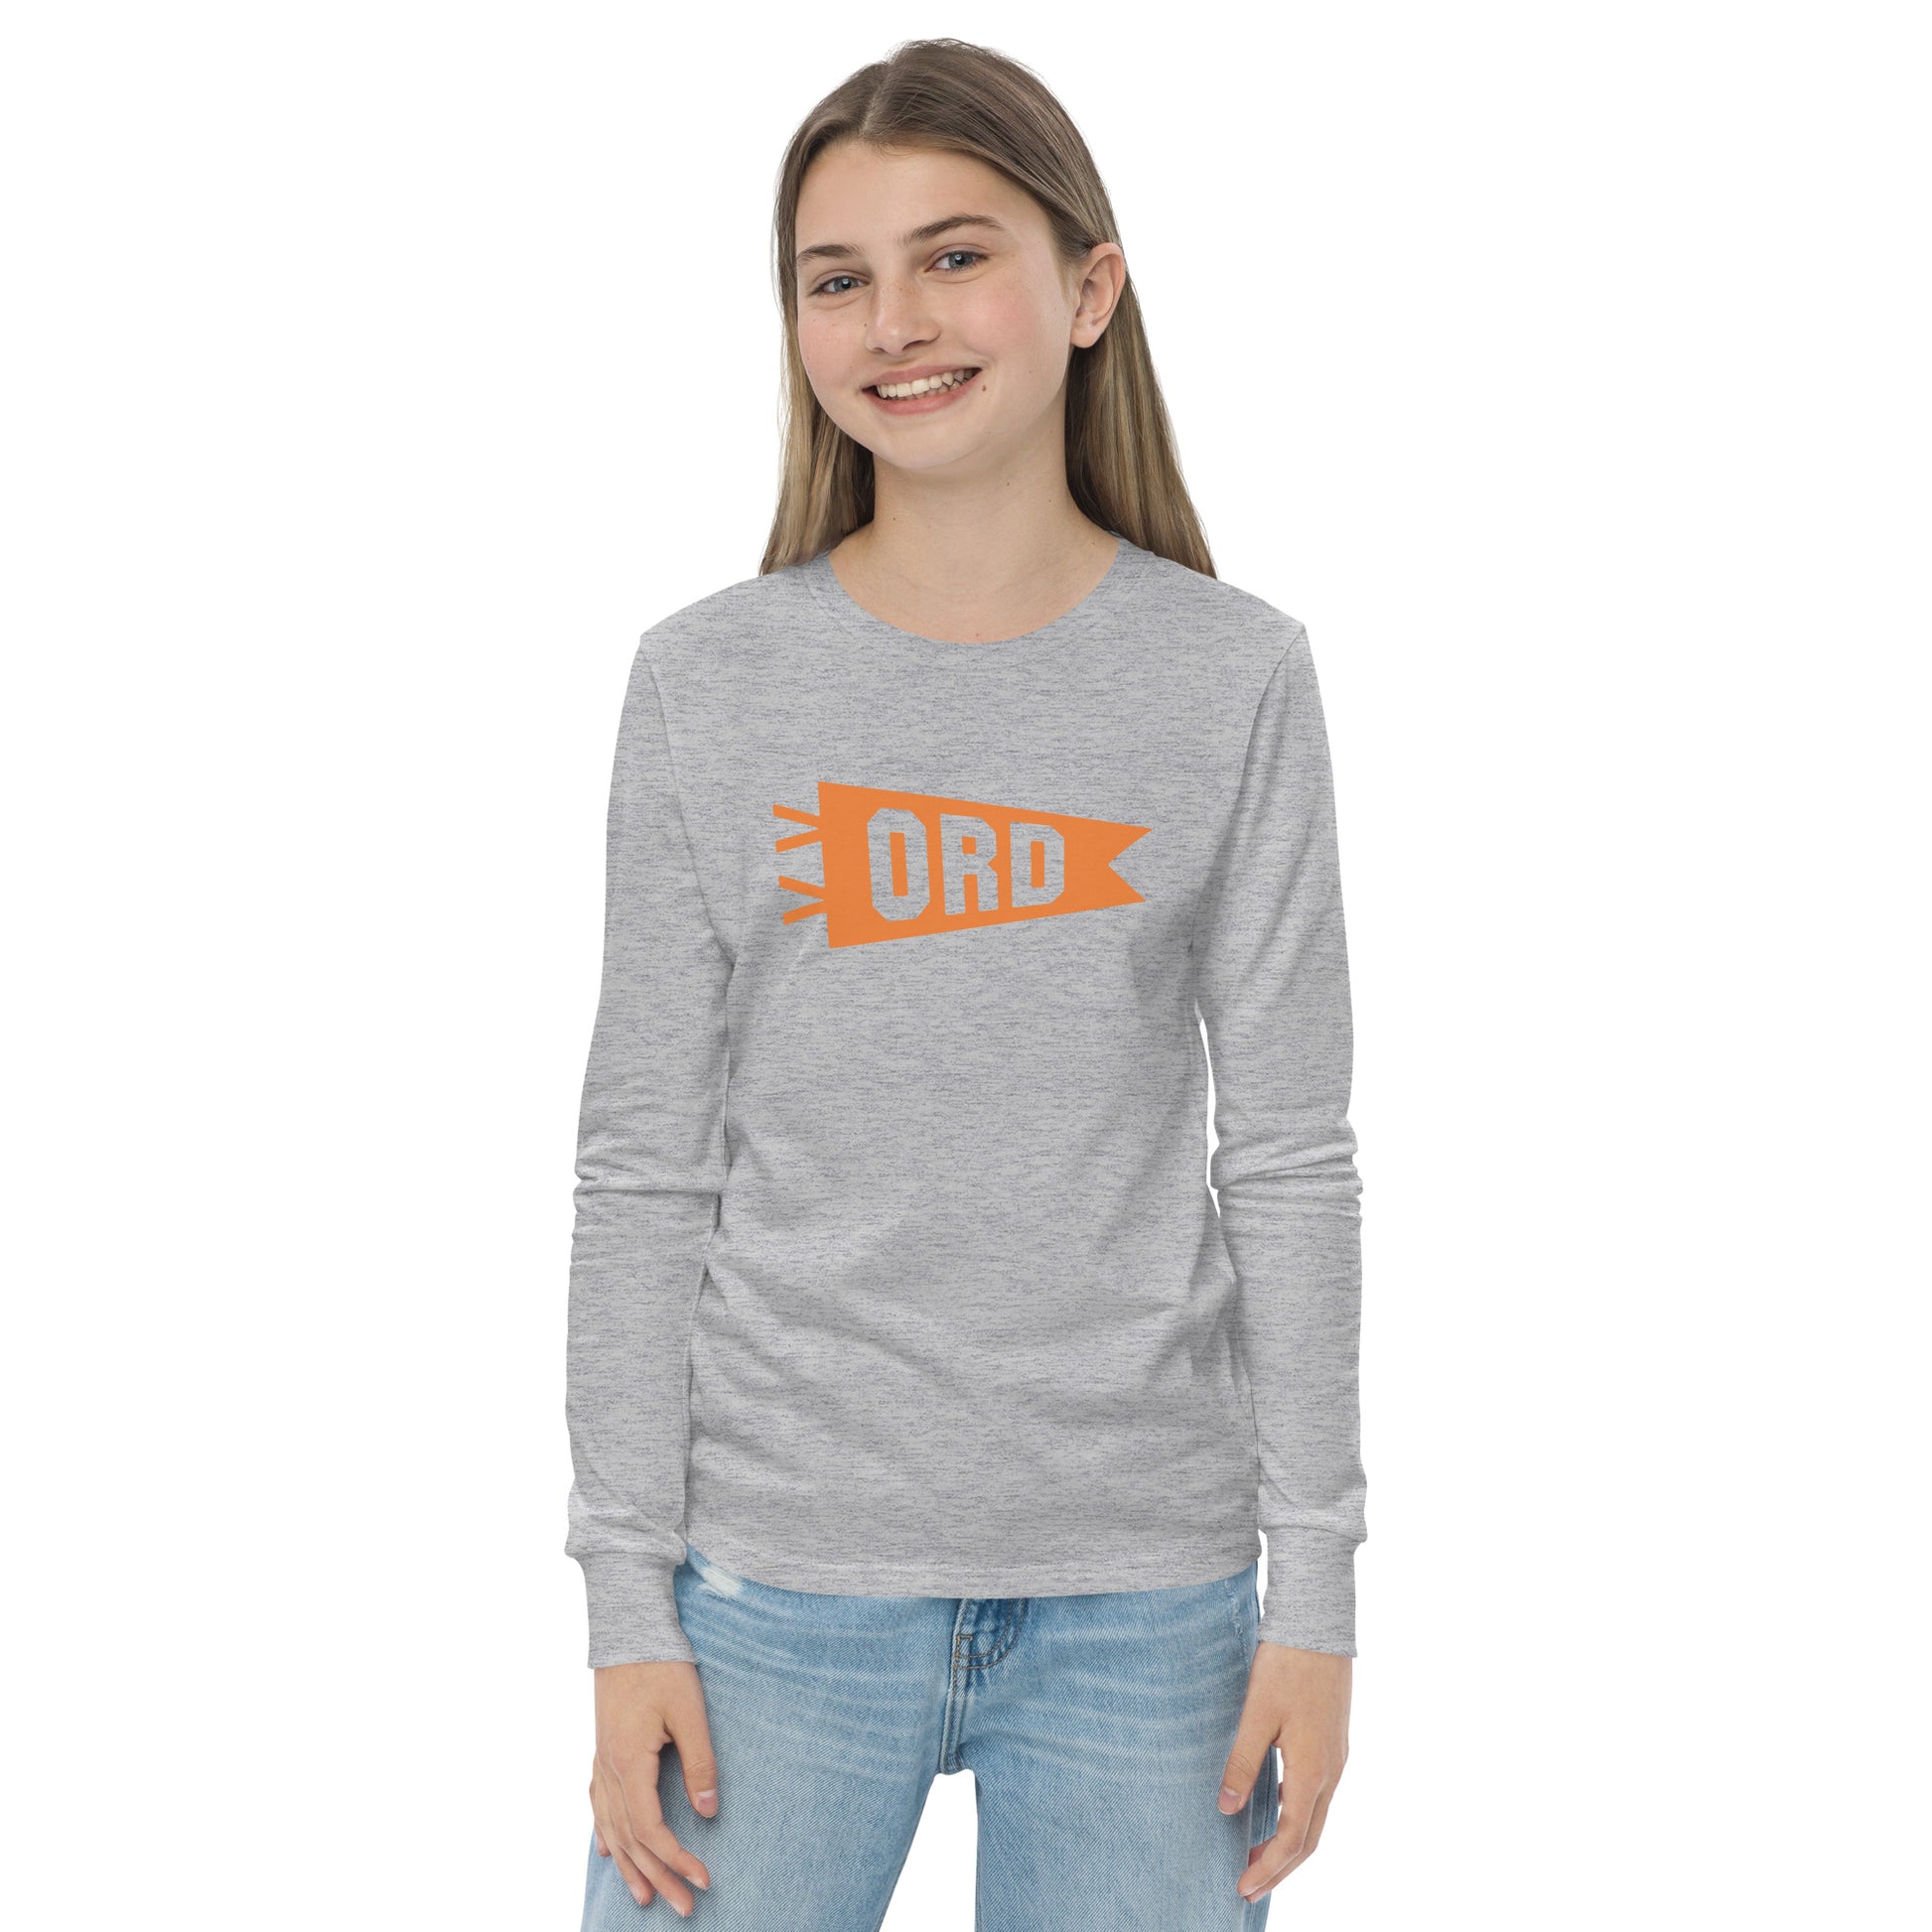 Kid's Airport Code Long-Sleeve Tee - Orange Graphic • ORD Chicago • YHM Designs - Image 08